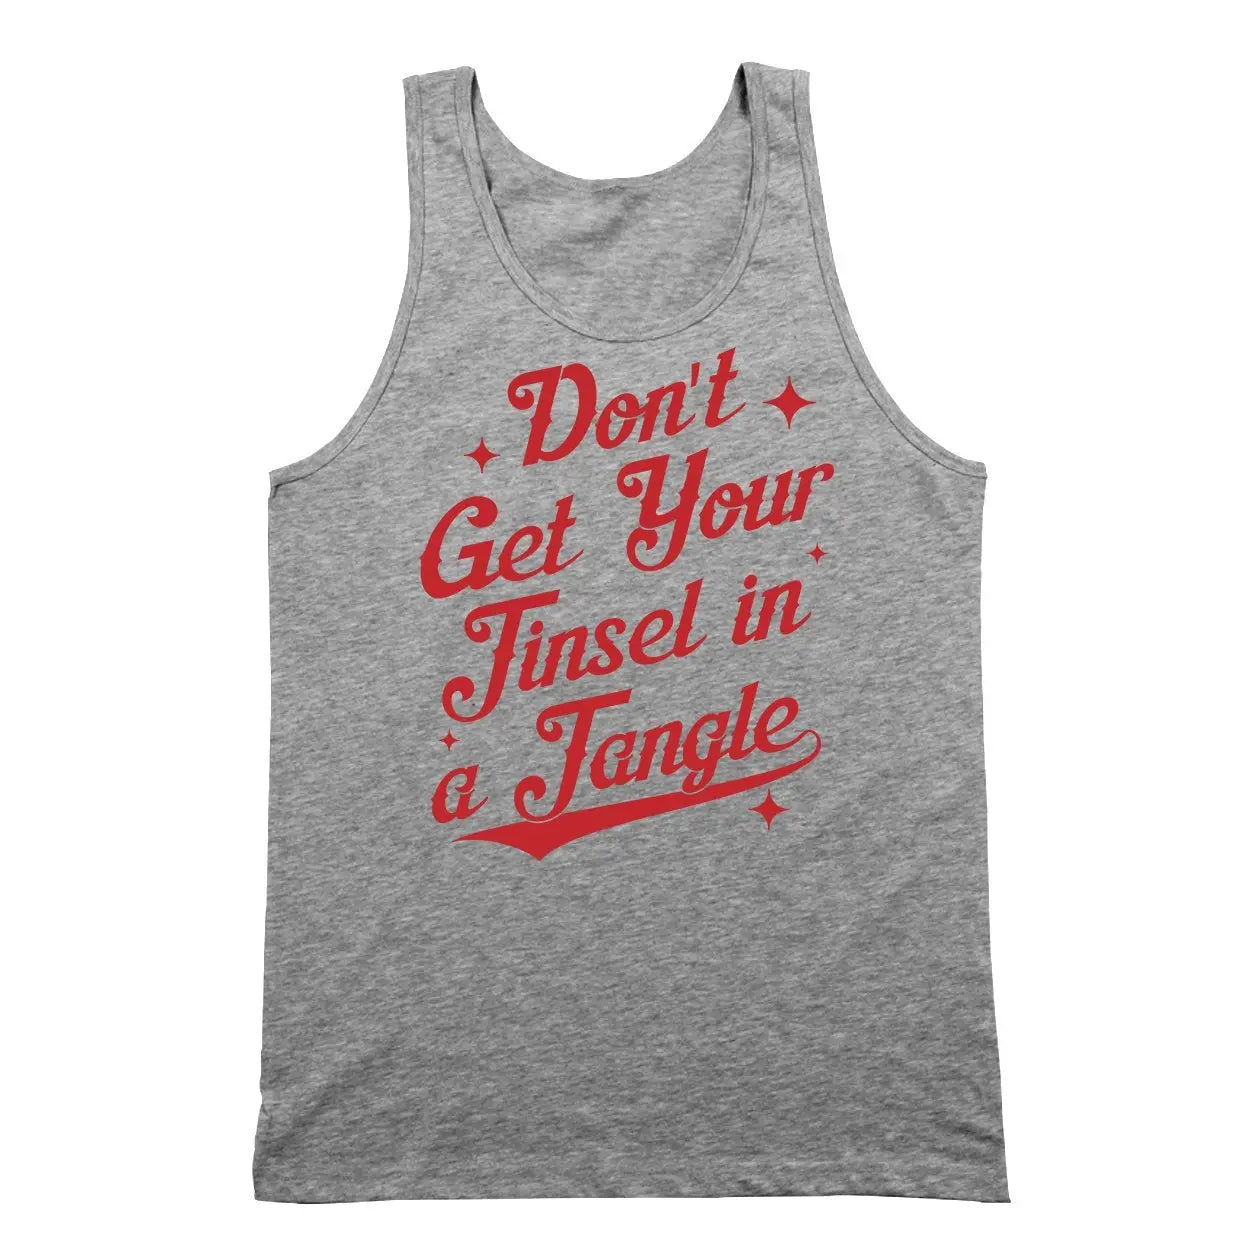 Don't Get Your Tinsel In A Tangle Tshirt - Donkey Tees